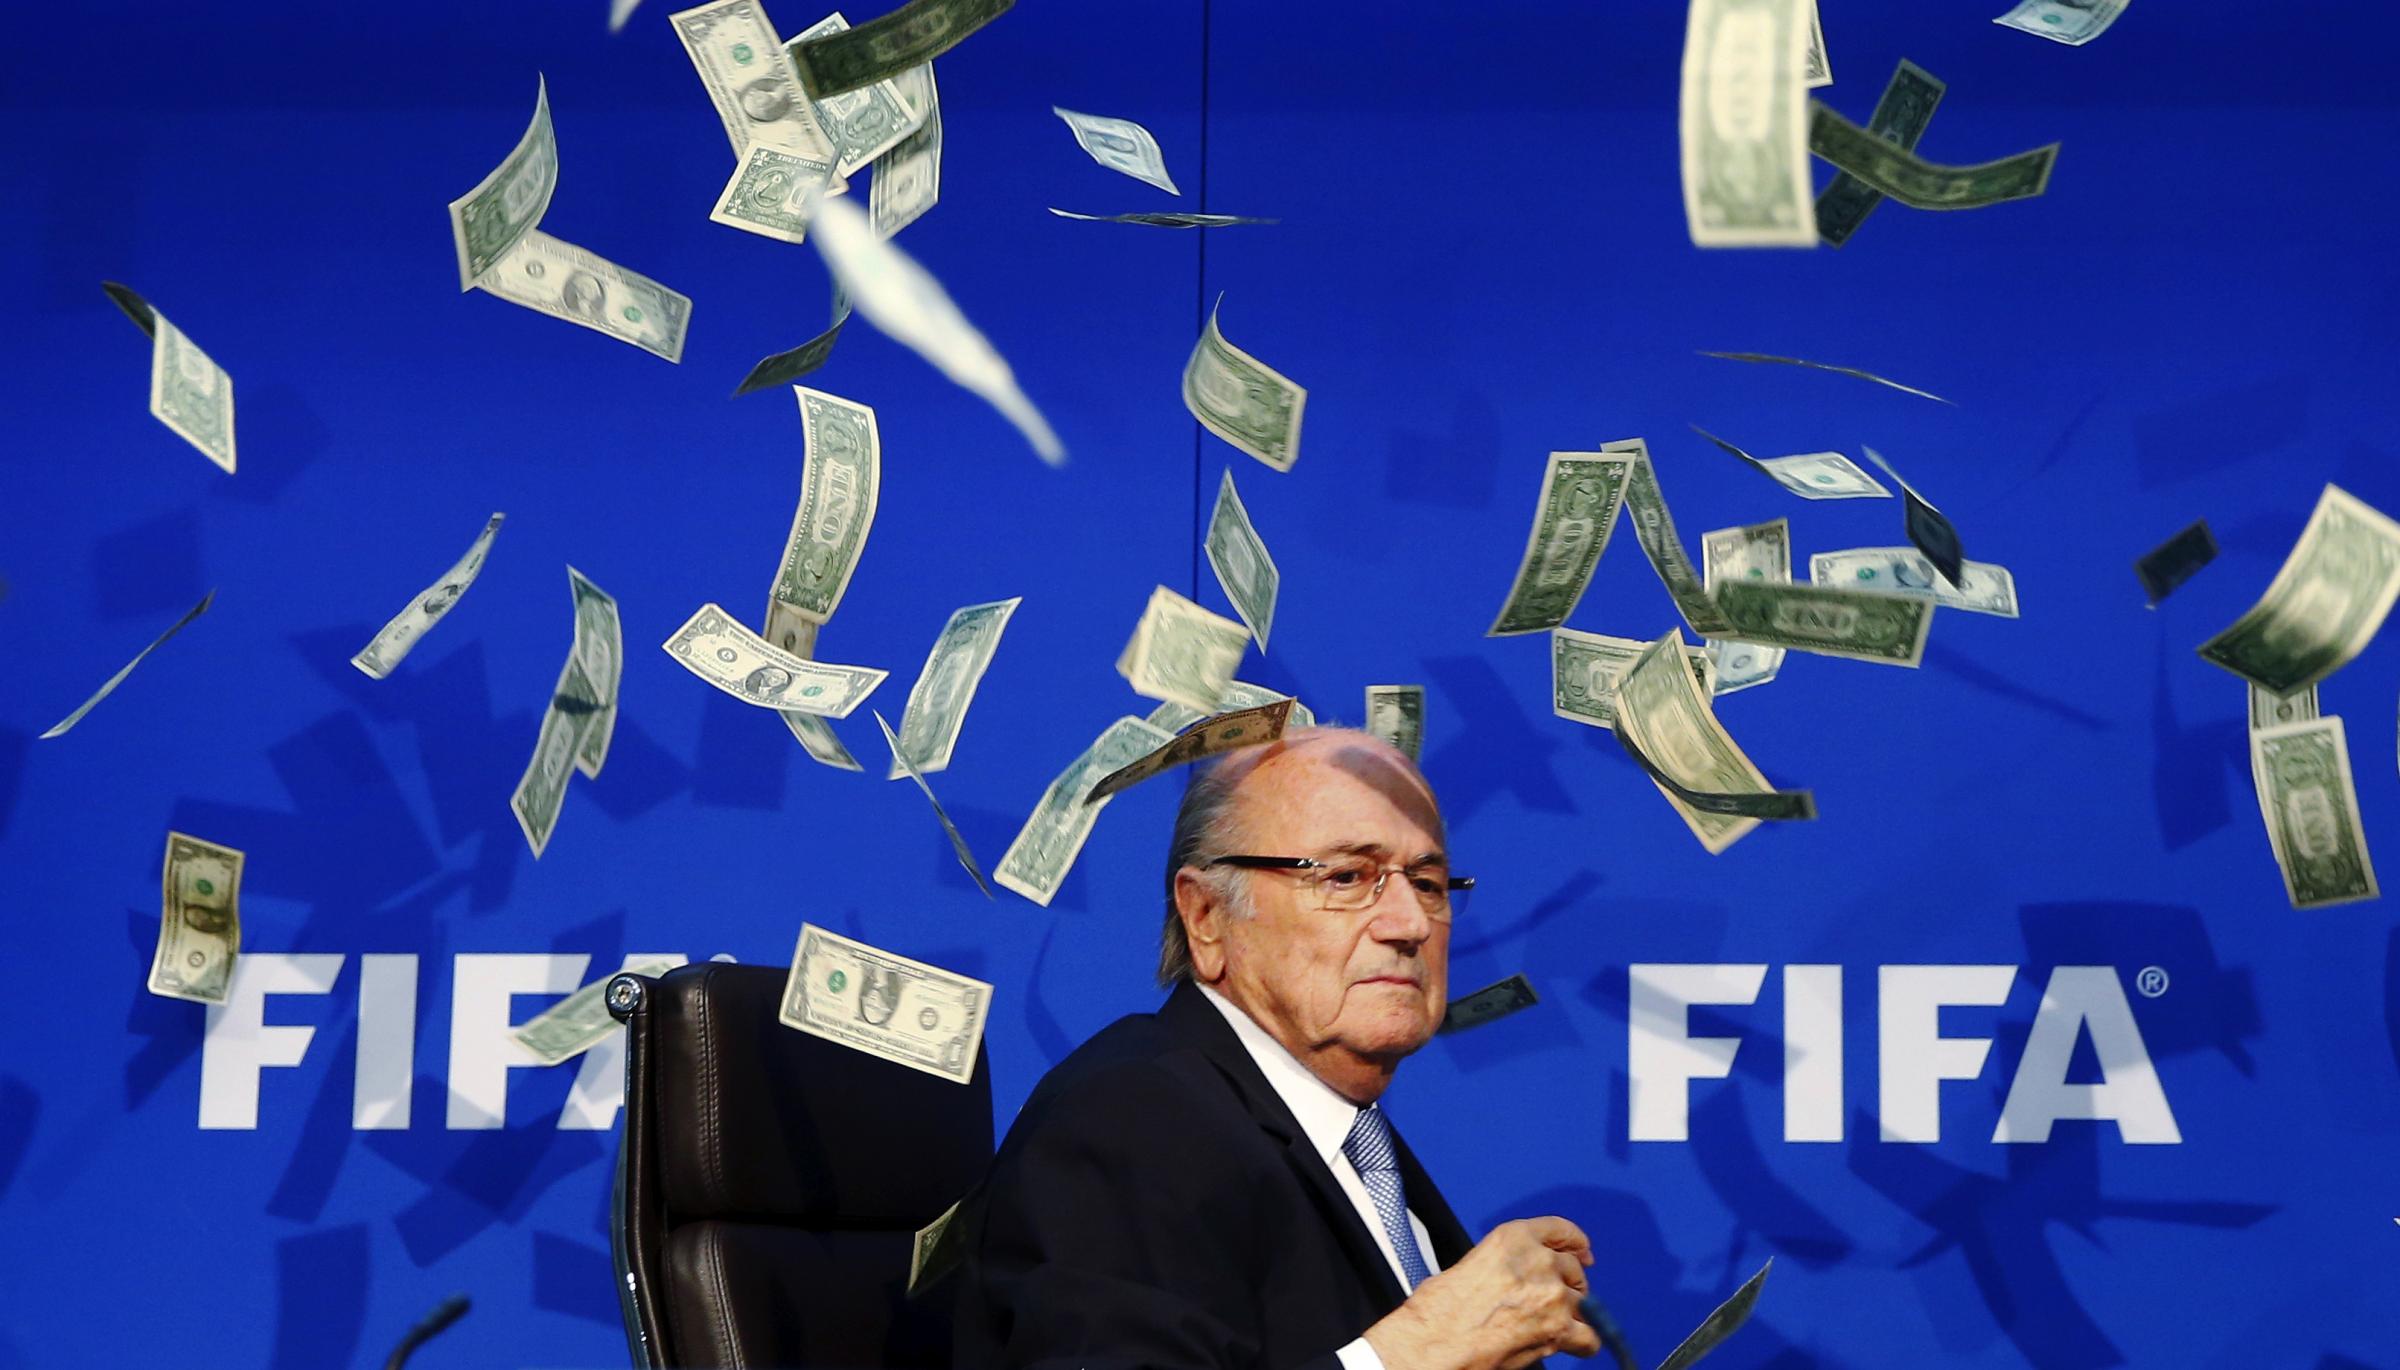 FIFA President Sepp Blatter is surrounded by banknotes thrown by a British comedian known as Lee Nelson at a news conference following the Extraordinary FIFA Executive Committee Meeting at FIFA headquarters in Zurich on July 20, 2015.